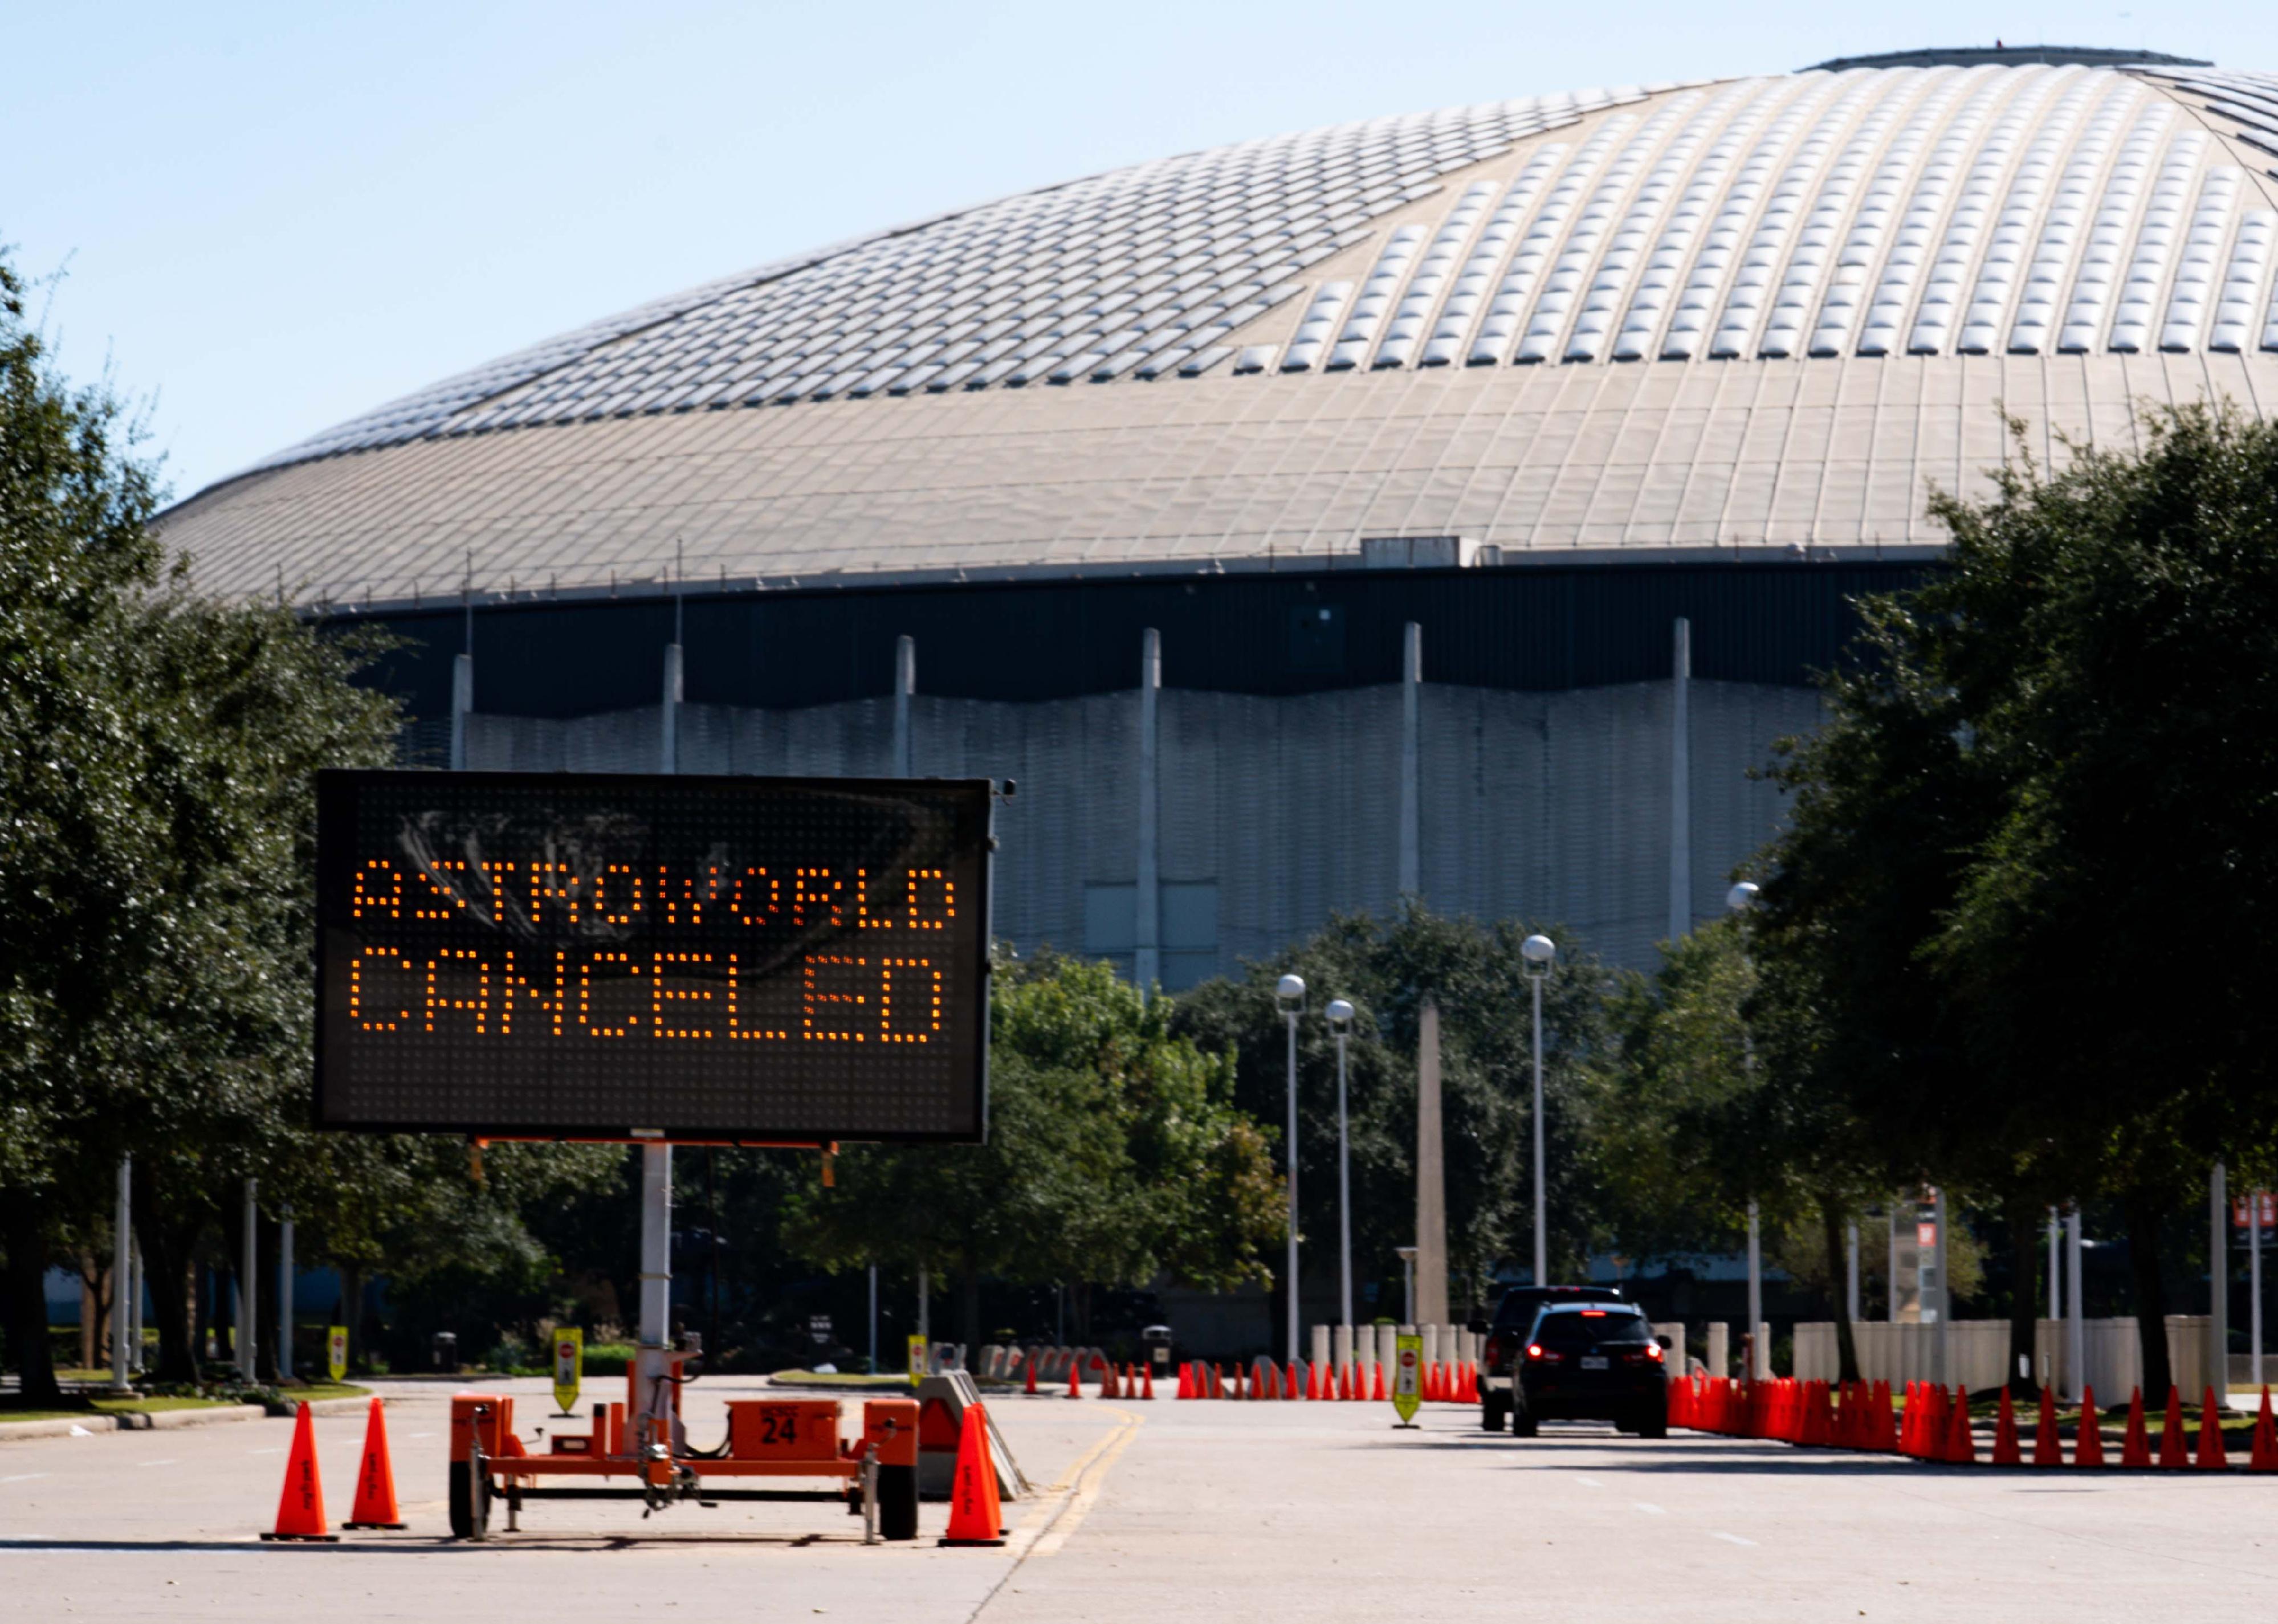 A street sign showing the cancellation of the AstroWorld Festival at NRG Park.